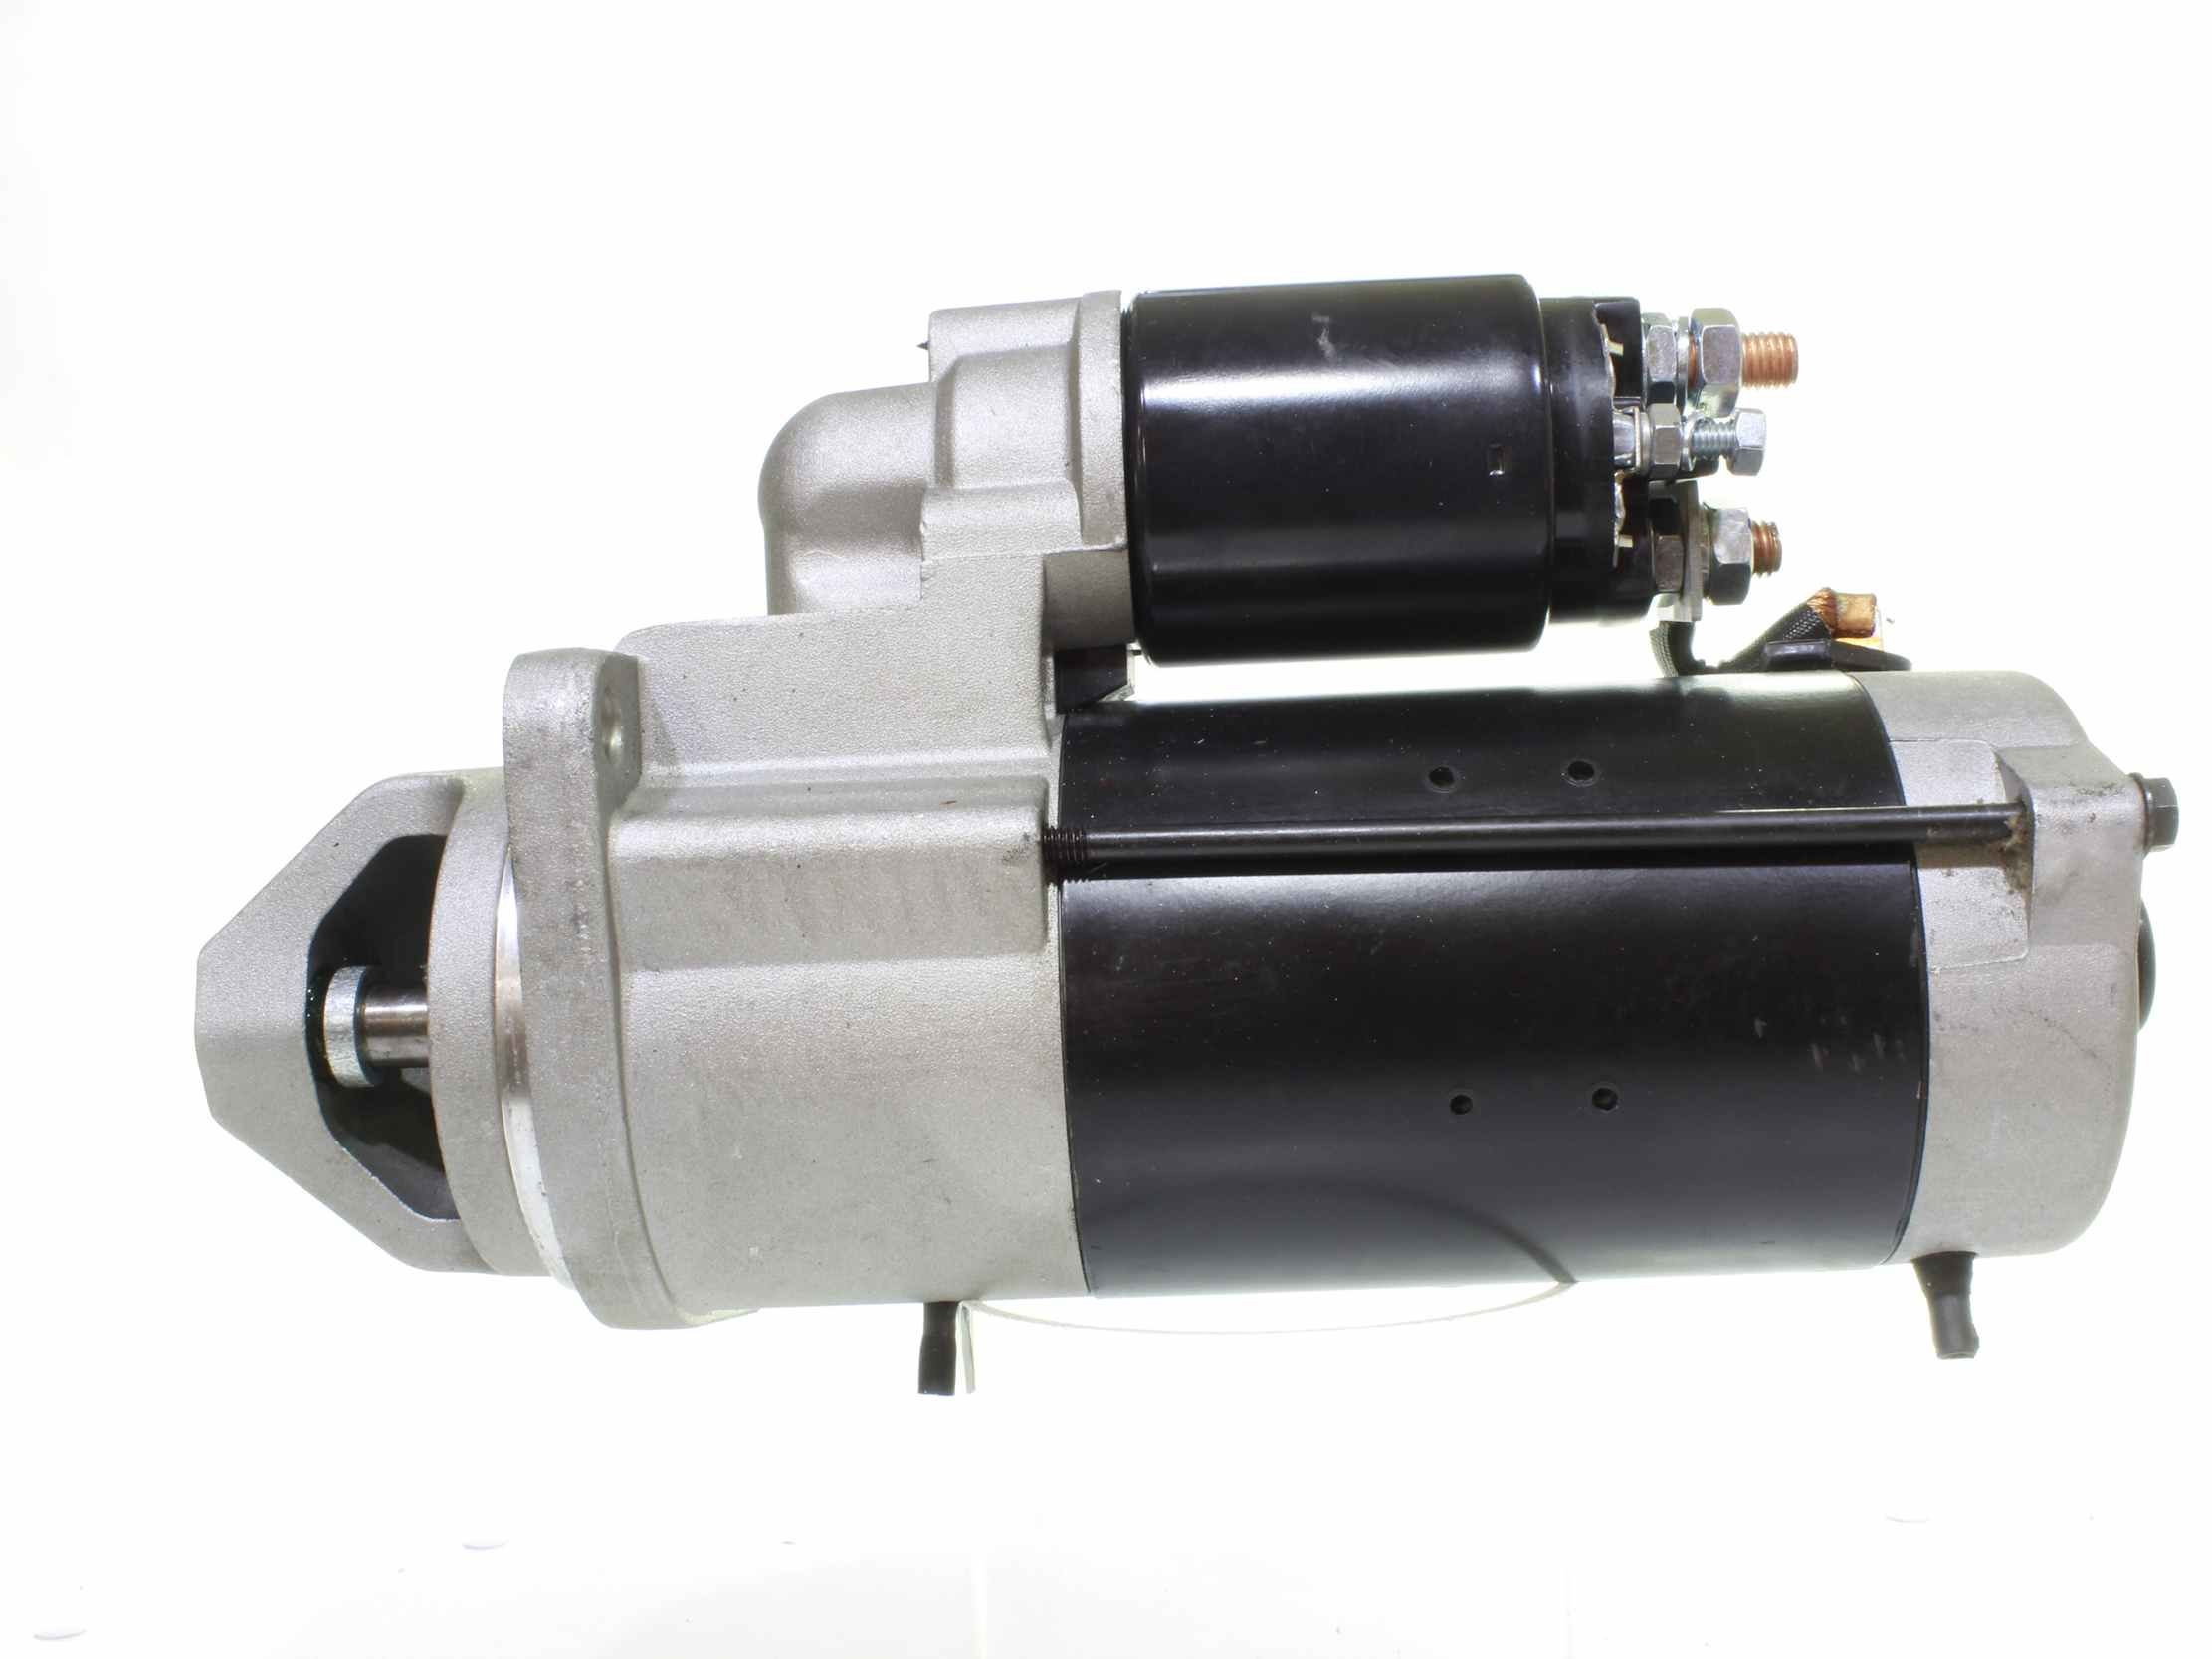 10441240 Engine starter motor ALANKO 101097R review and test